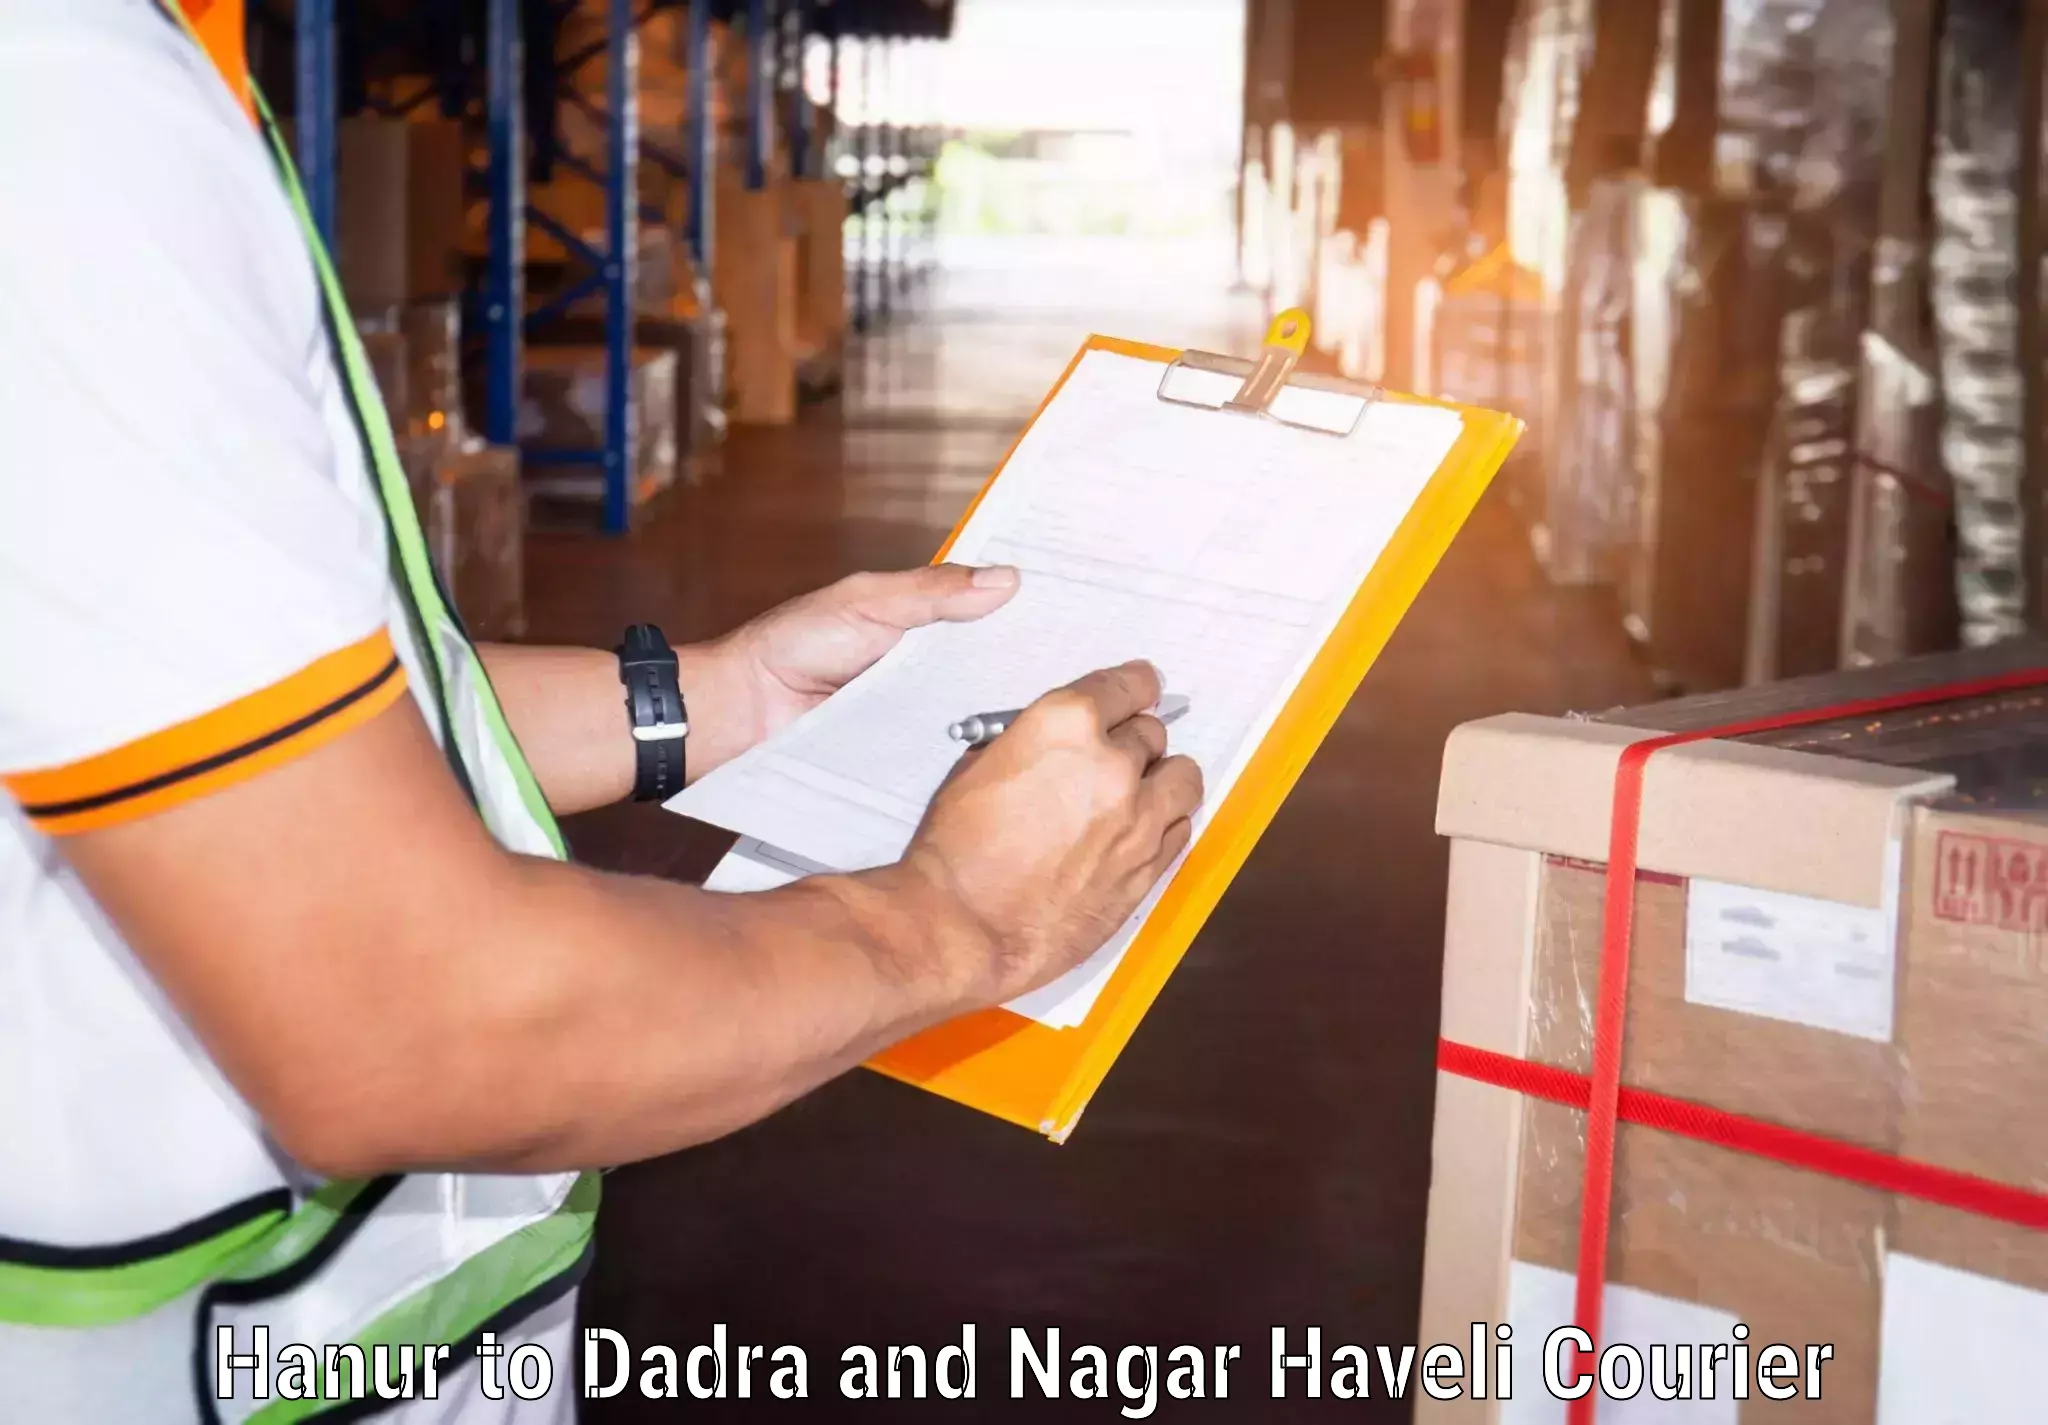 Overnight delivery in Hanur to Dadra and Nagar Haveli